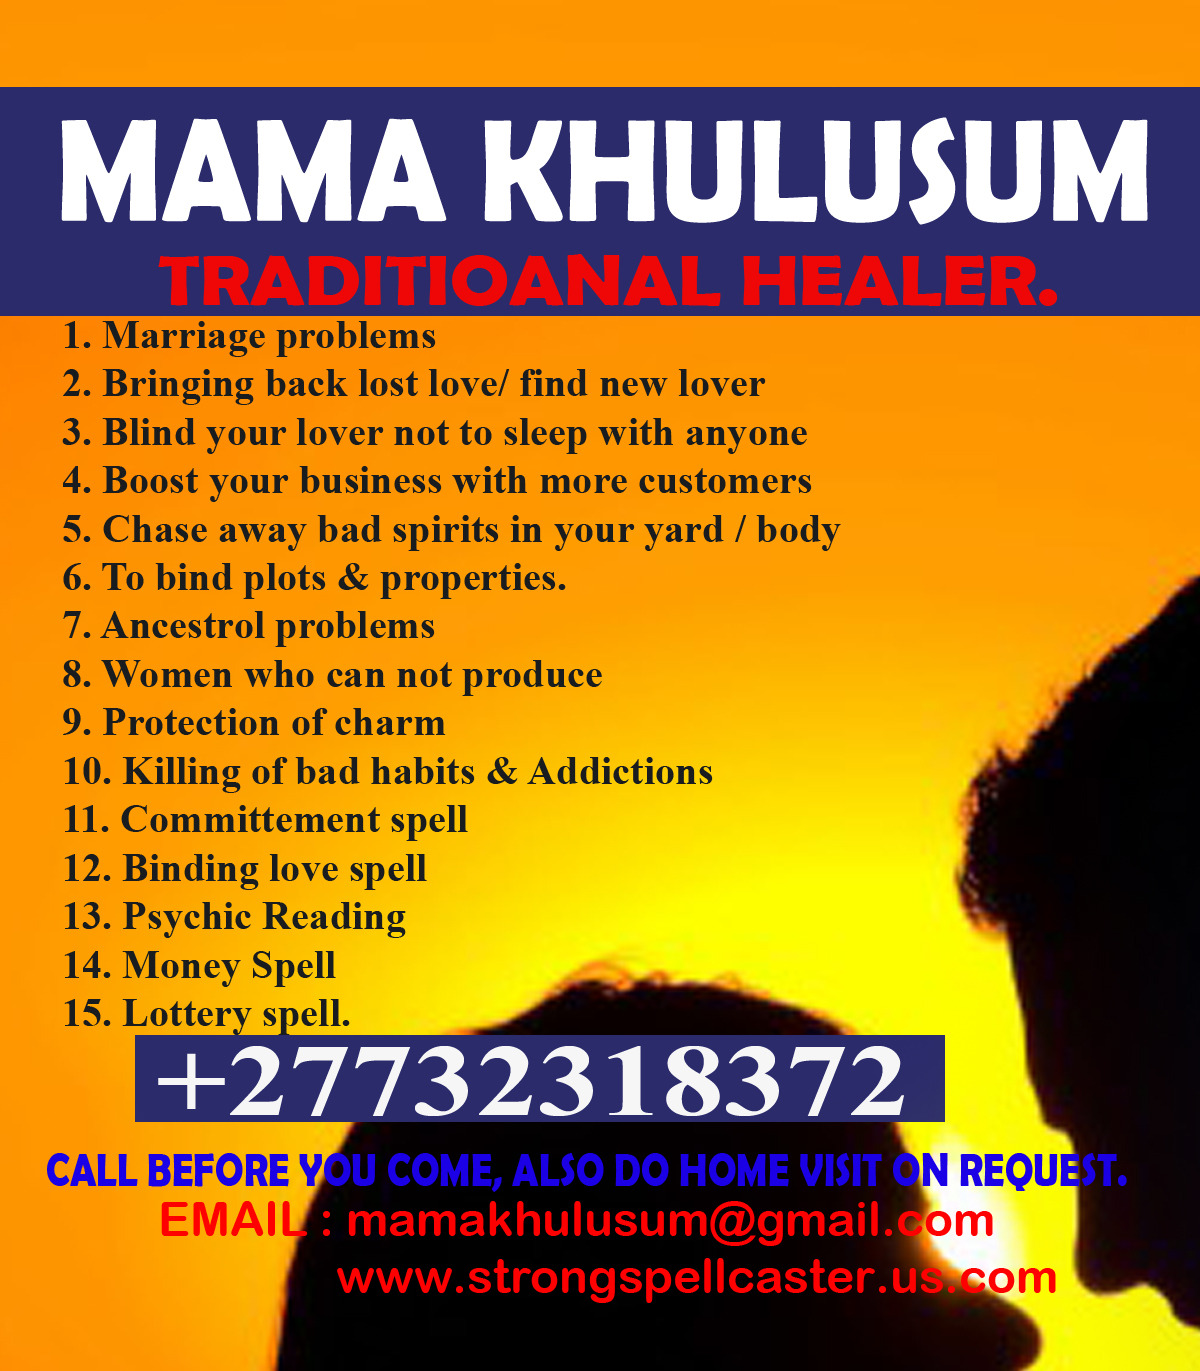 LOST LOVE SPELL CASTER +27732318372 MAMA KHULUSUM IN NEWCASTLE-,Johannesburg,Services,Free Classifieds,Post Free Ads,77traders.com